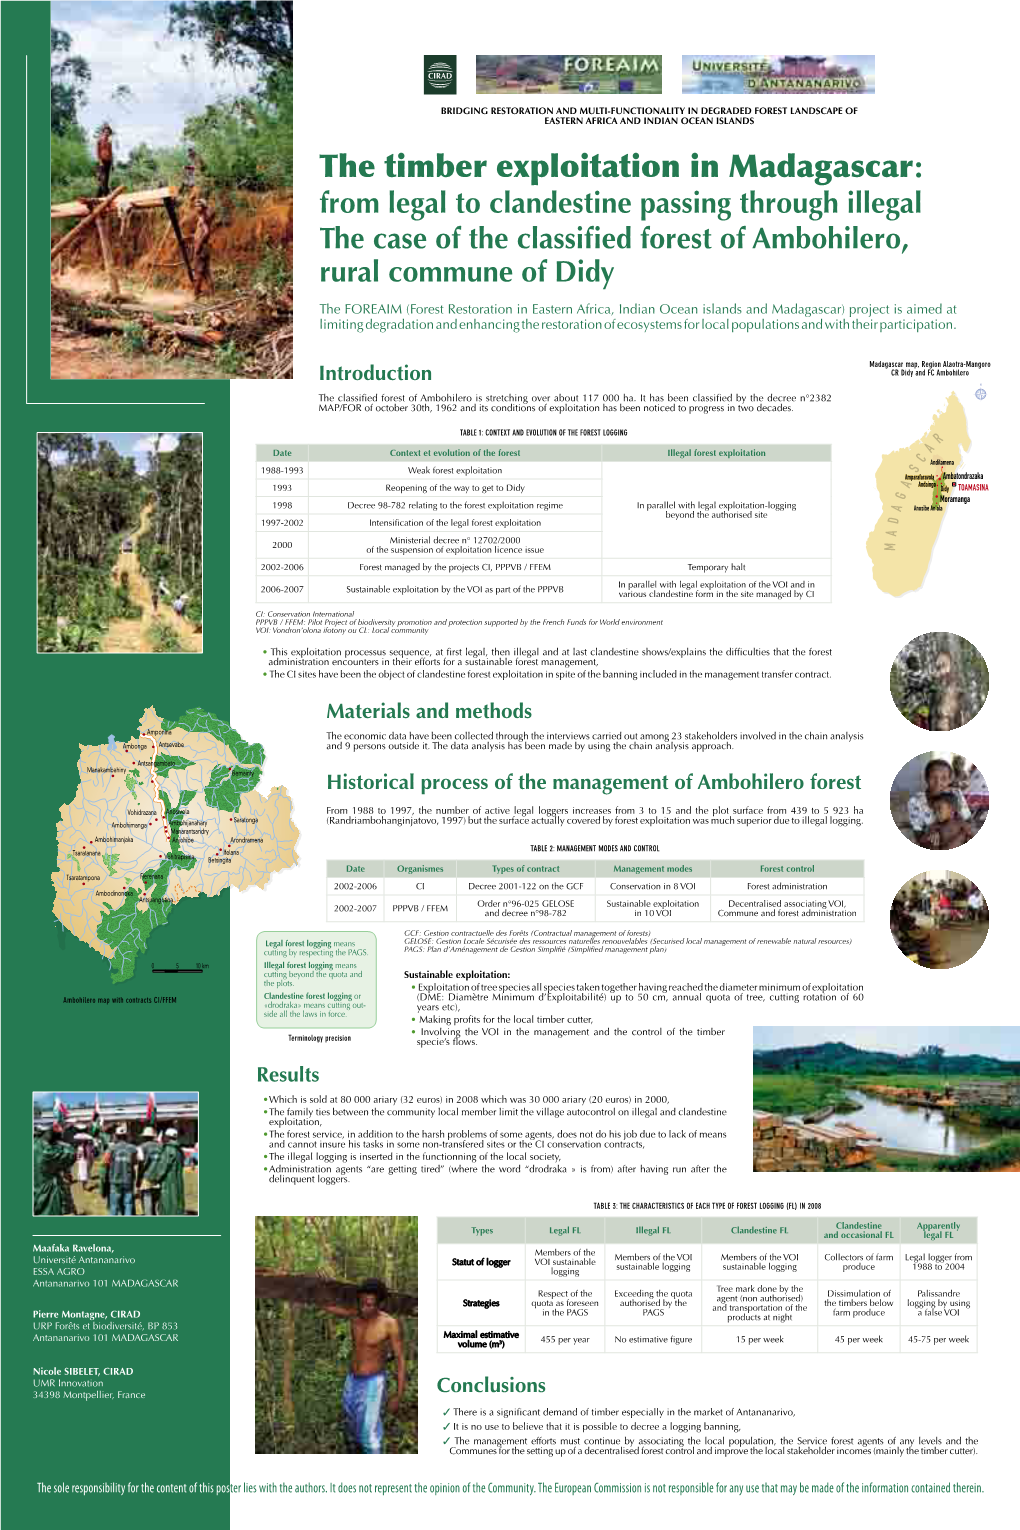 The Timber Exploitation in Madagascar: from Legal to Clandestine Passing Through Illegal the Case of the Classified Forest of Ambohilero, Rural Commune of Didy